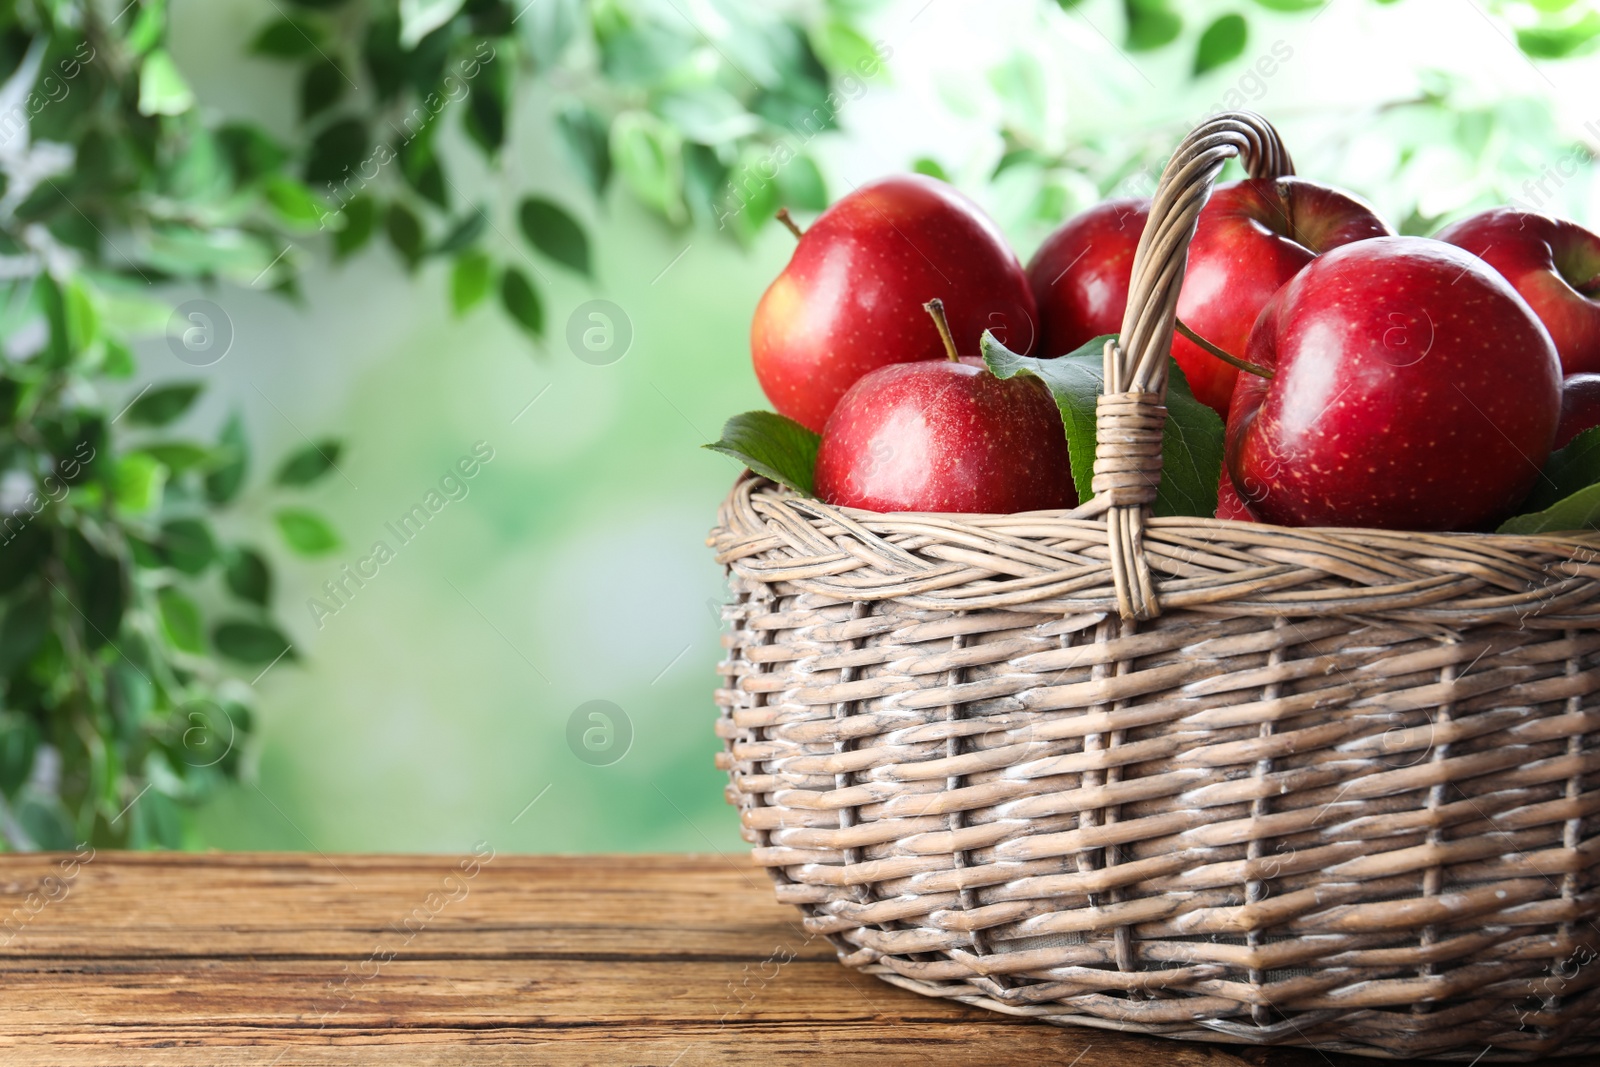 Photo of Juicy red apples in wicker basket on wooden table outdoors. Space for text